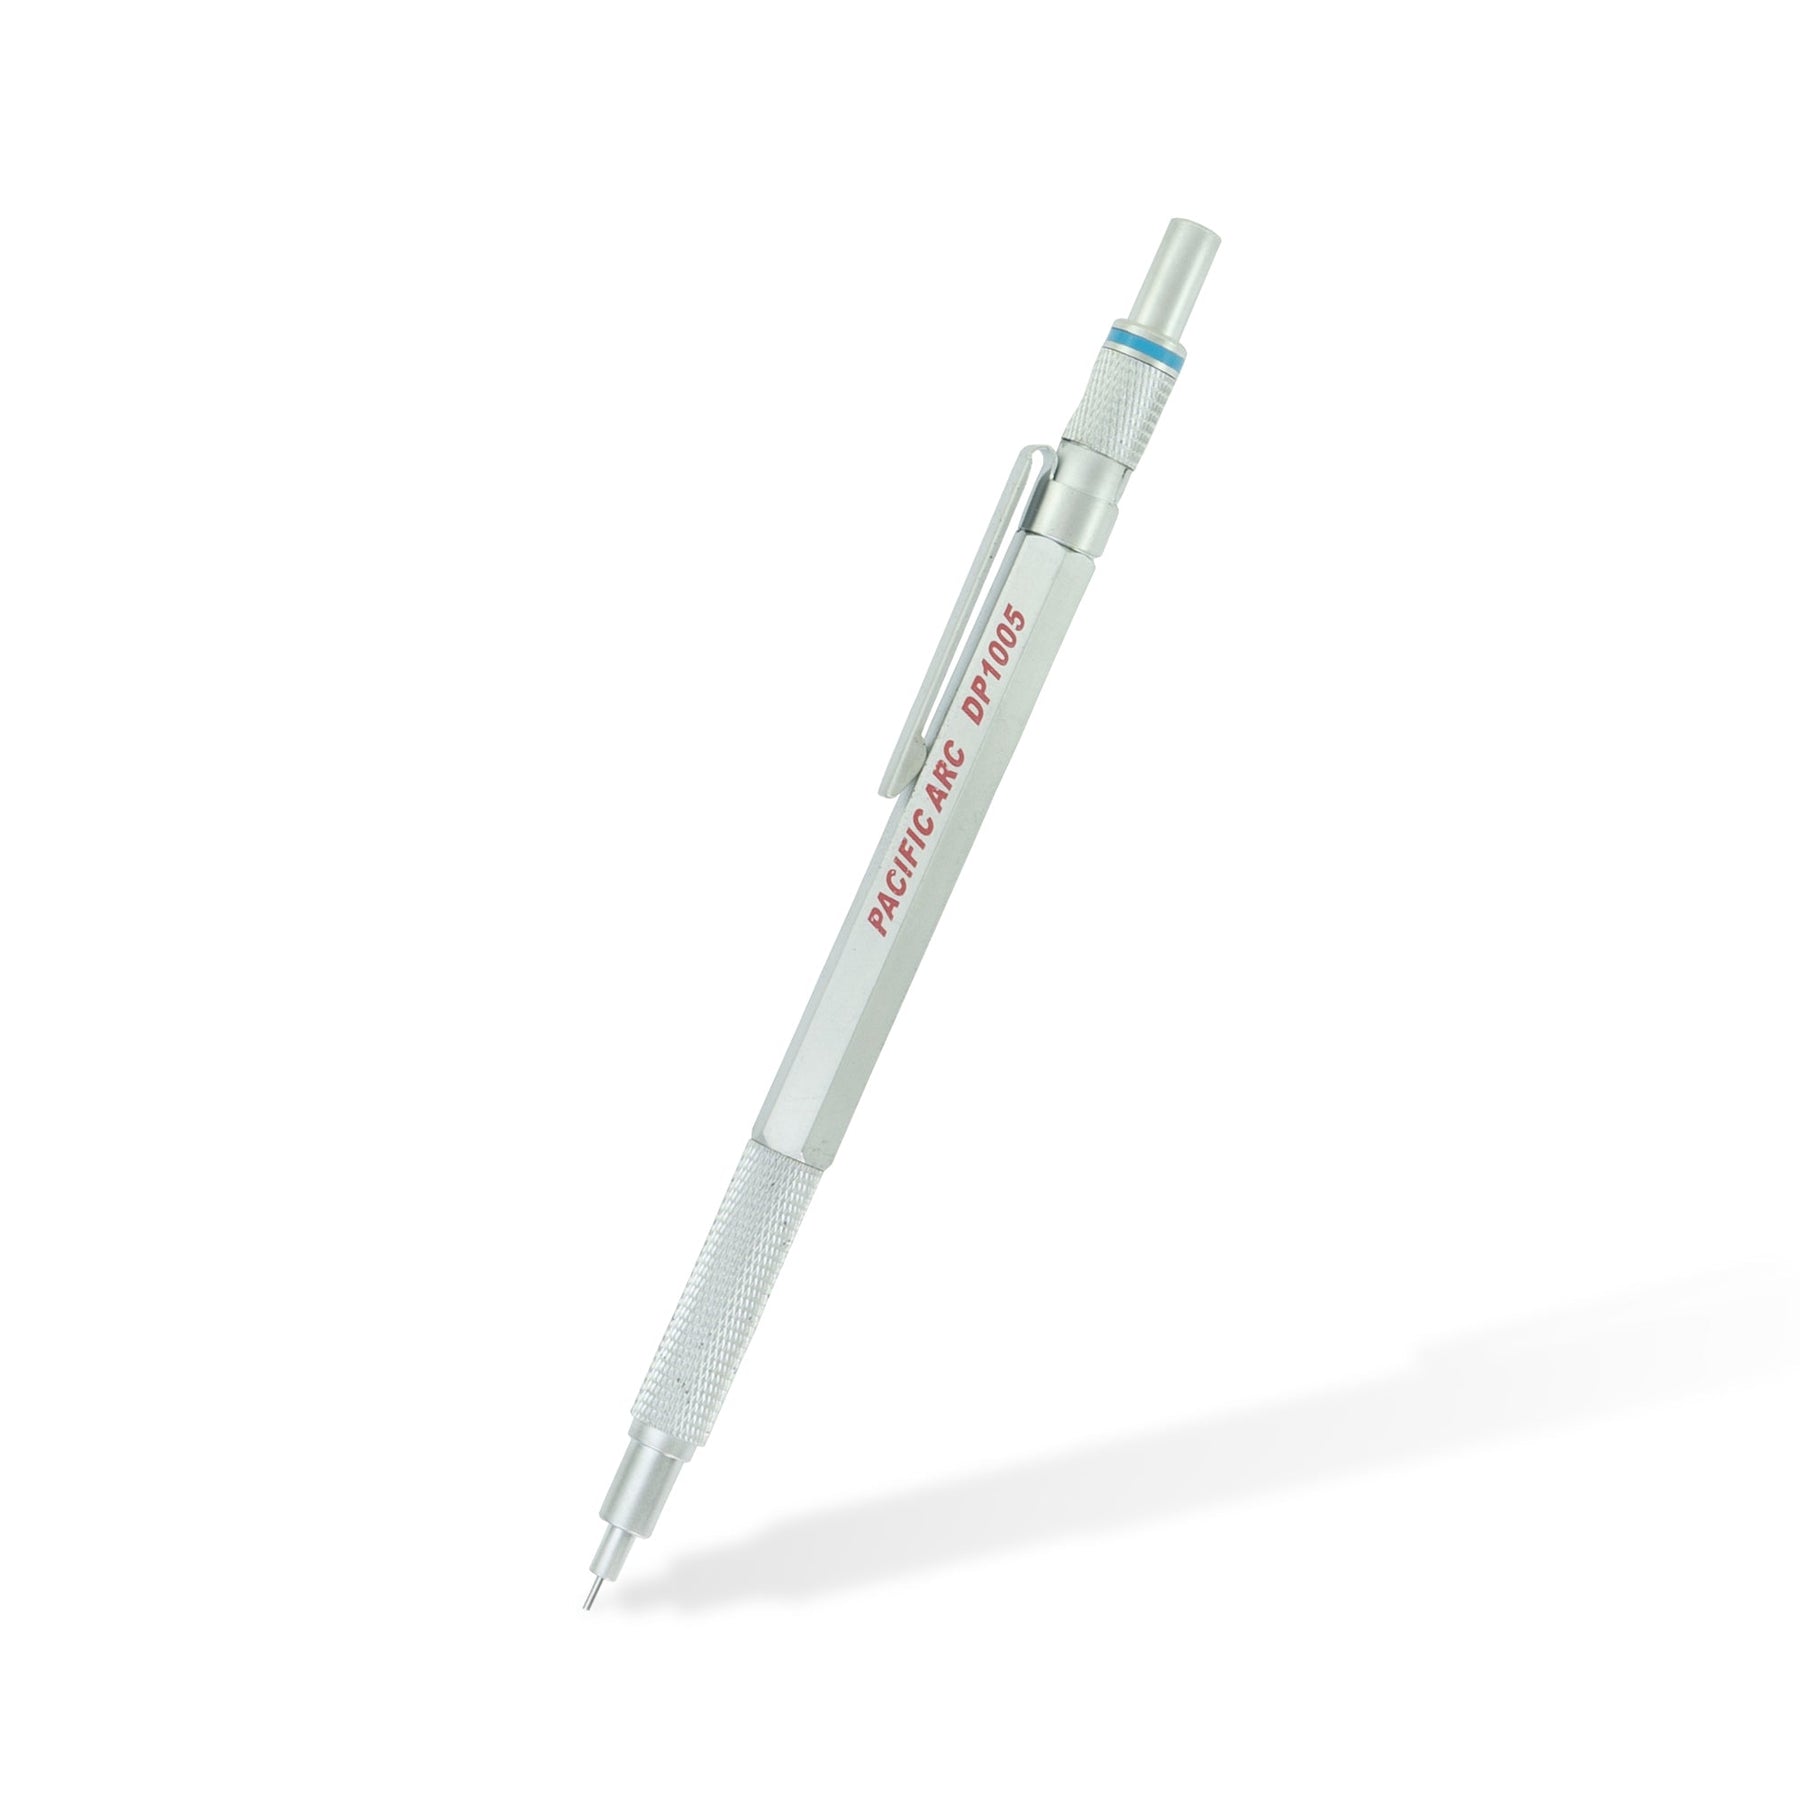 Wholesale 6b pencil For Writing on Various Surfaces 